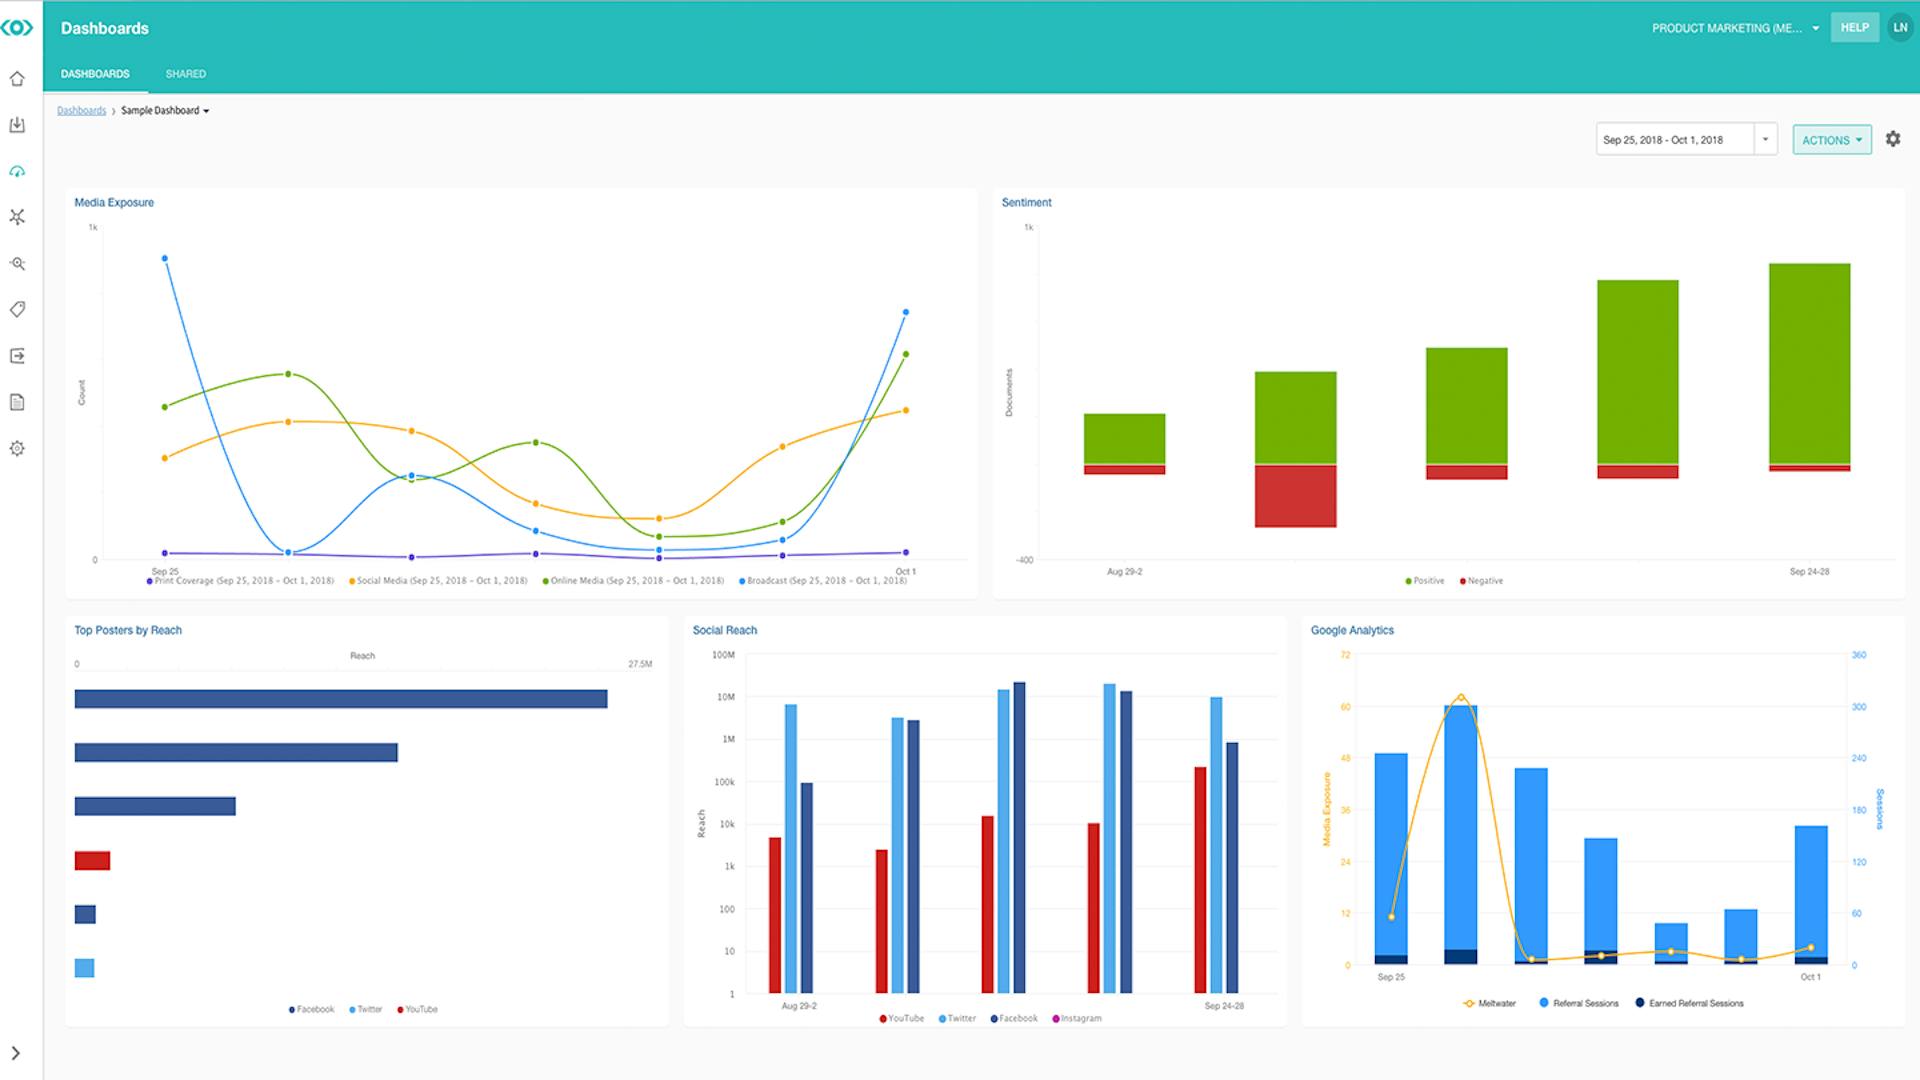 Screenshot of the Meltwater media intelligence platform with dashboards